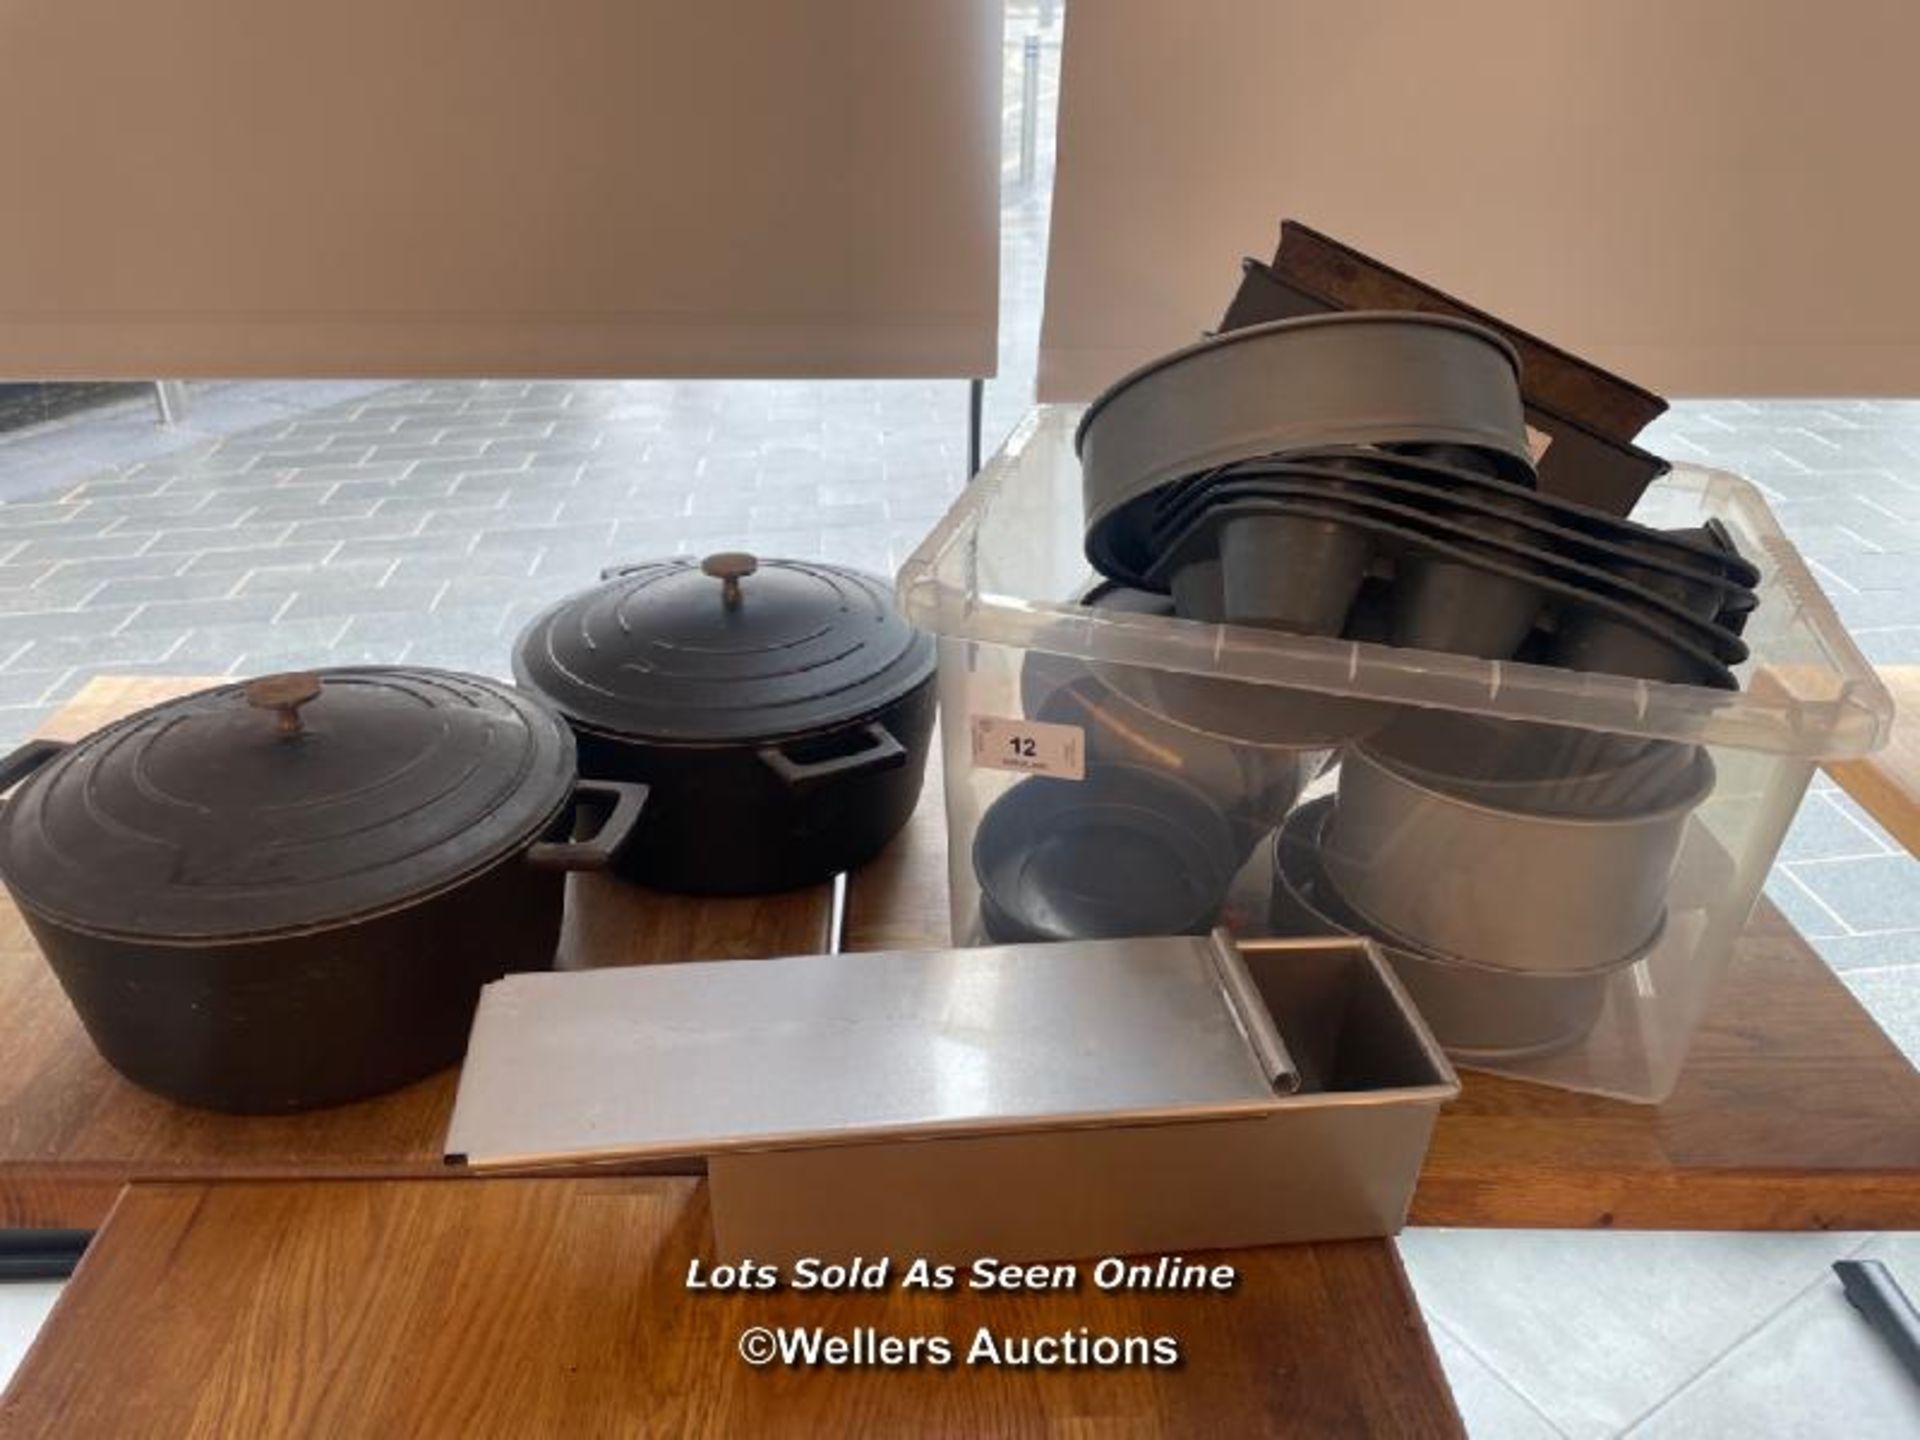 ASSORTED PANS, BAKING TINS ETC / THE LOTS IN THIS AUCTION ARE LOCATED IN WOKING, SURREY. PLEASE